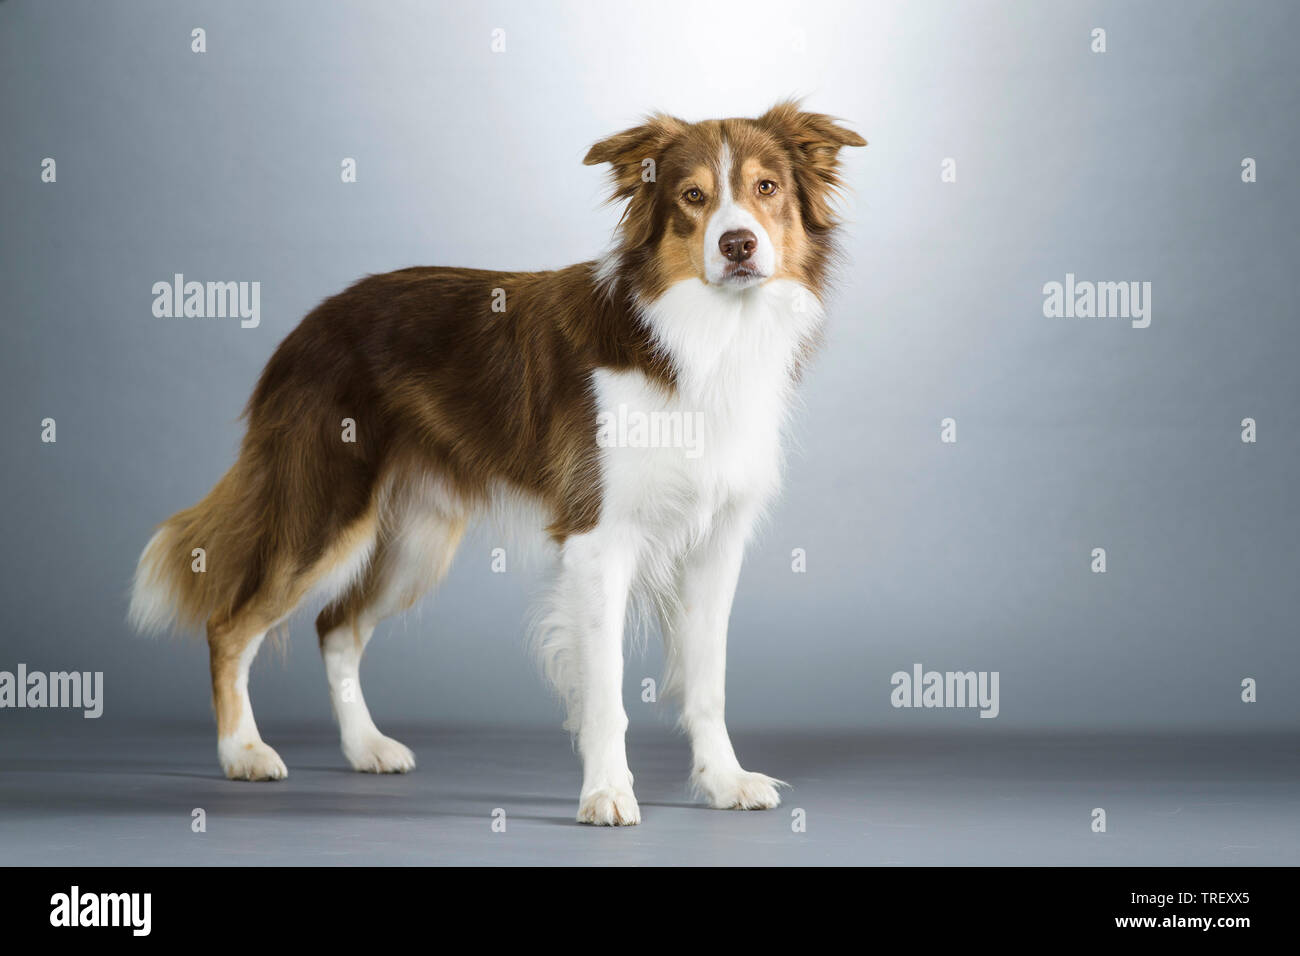 Border Collie. Adult dog standing. Studio picture against a gray background. Germany Stock Photo